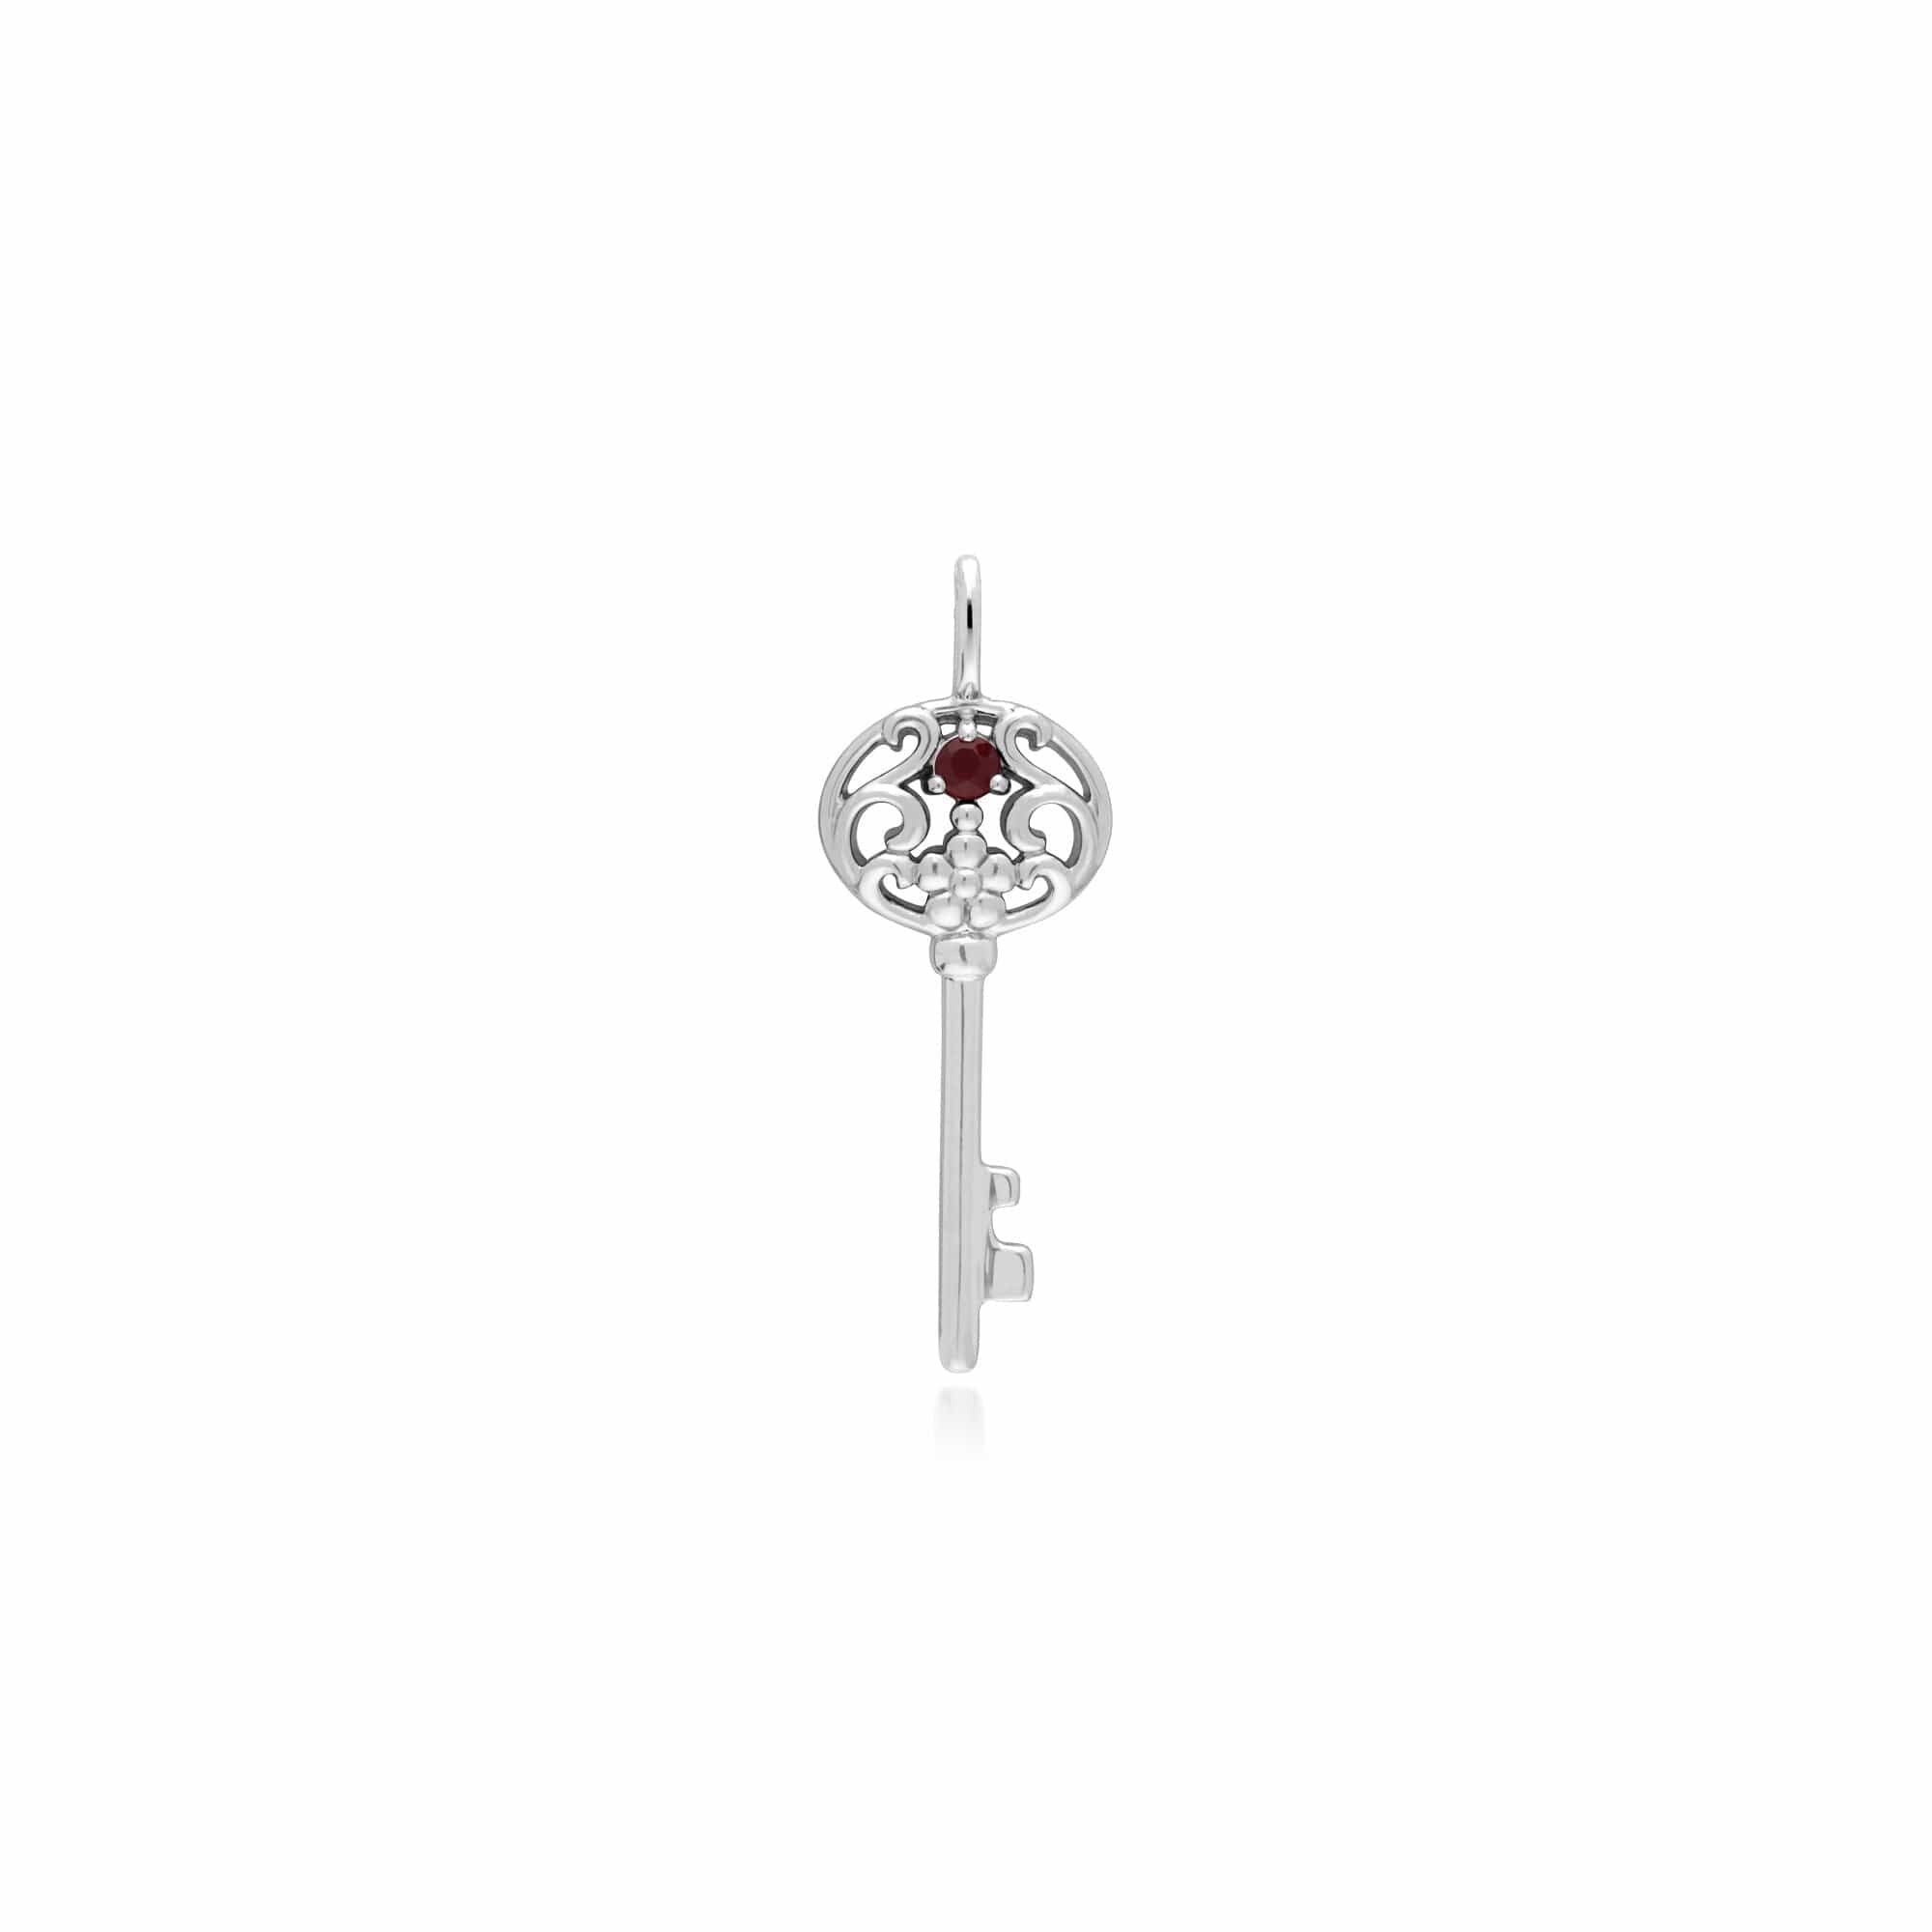 270P026806925-270P027001925 Classic Heart Lock Pendant & Ruby Big Key Charm in 925 Sterling Silver 2